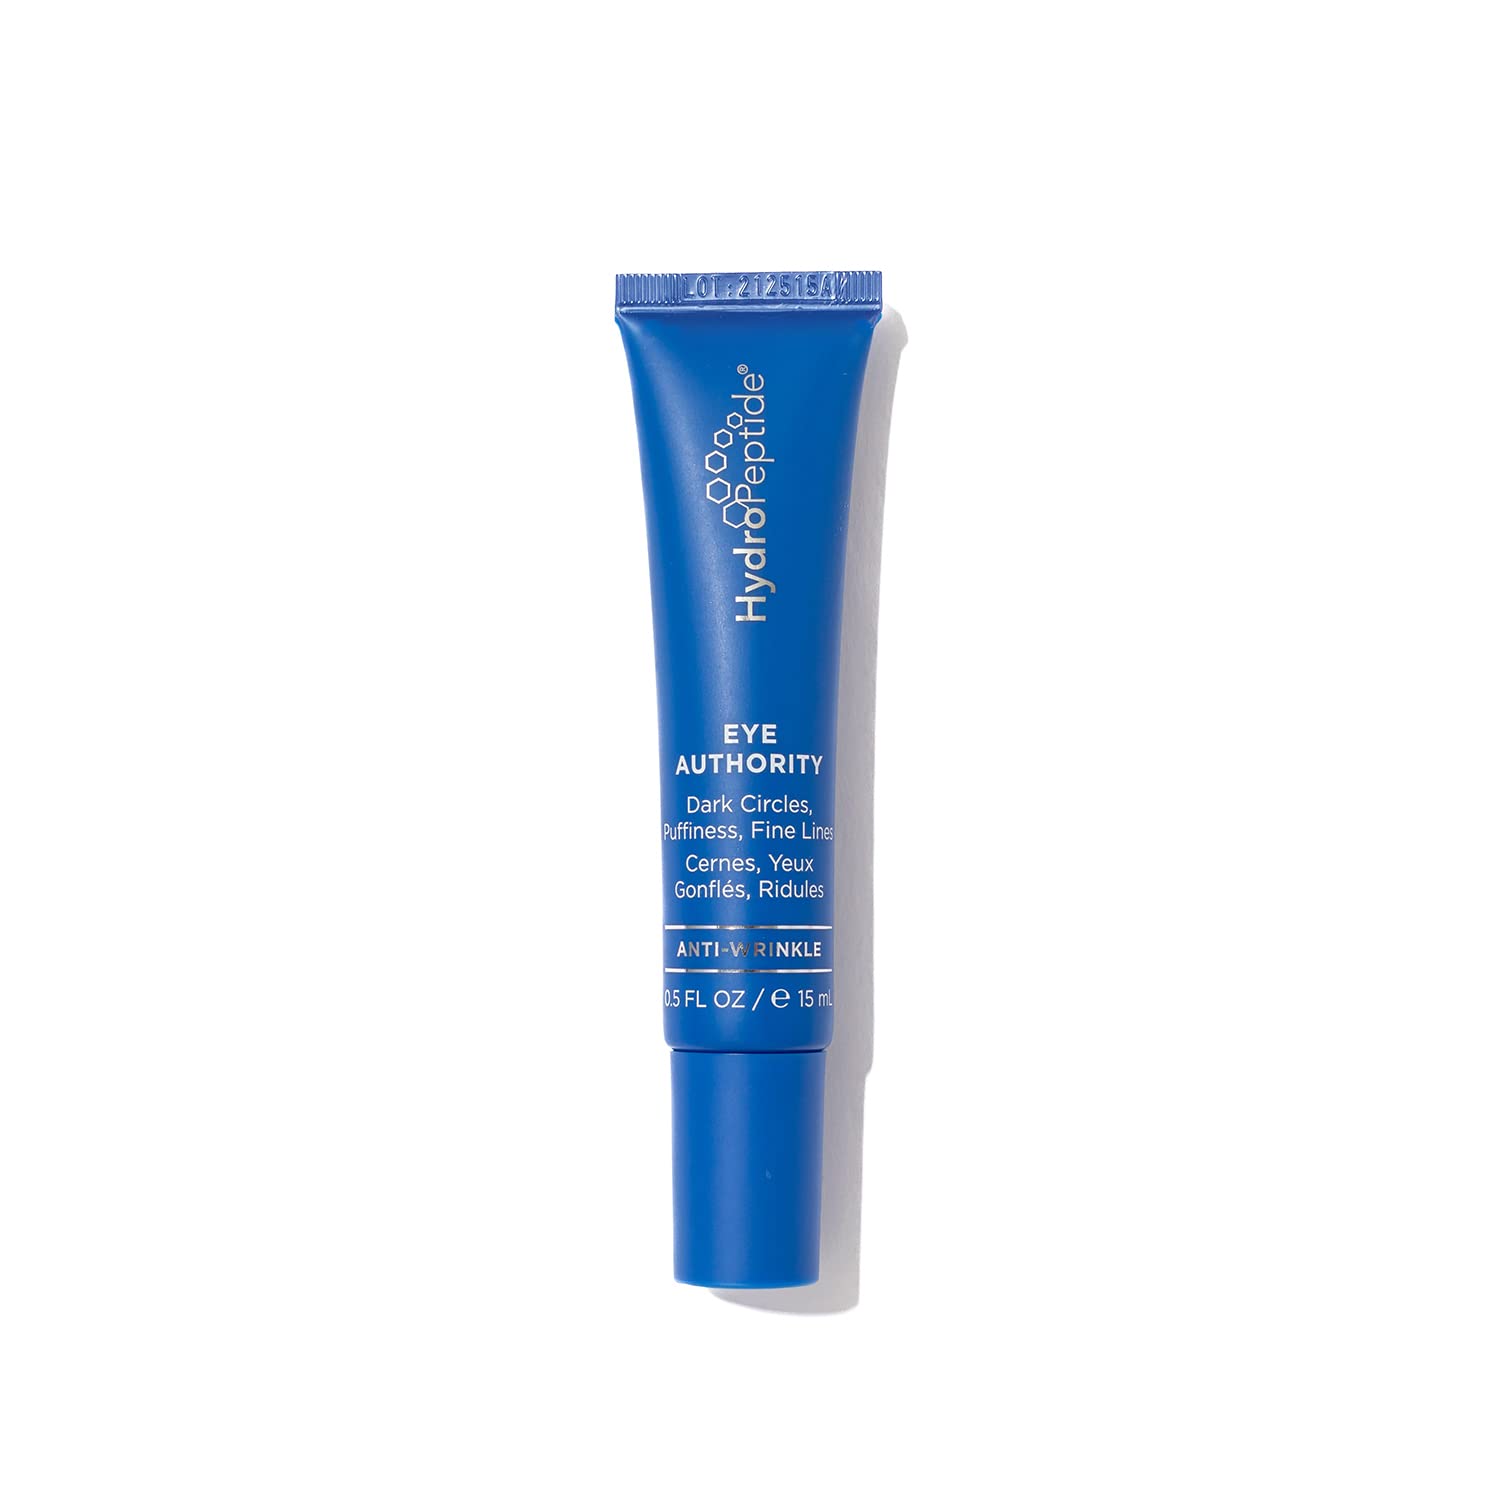 HydroPeptide Eye Authority, Brightens and Helps Restore Radiance to Tired Looking Eyes, 0.5  (Packaging May Vary)